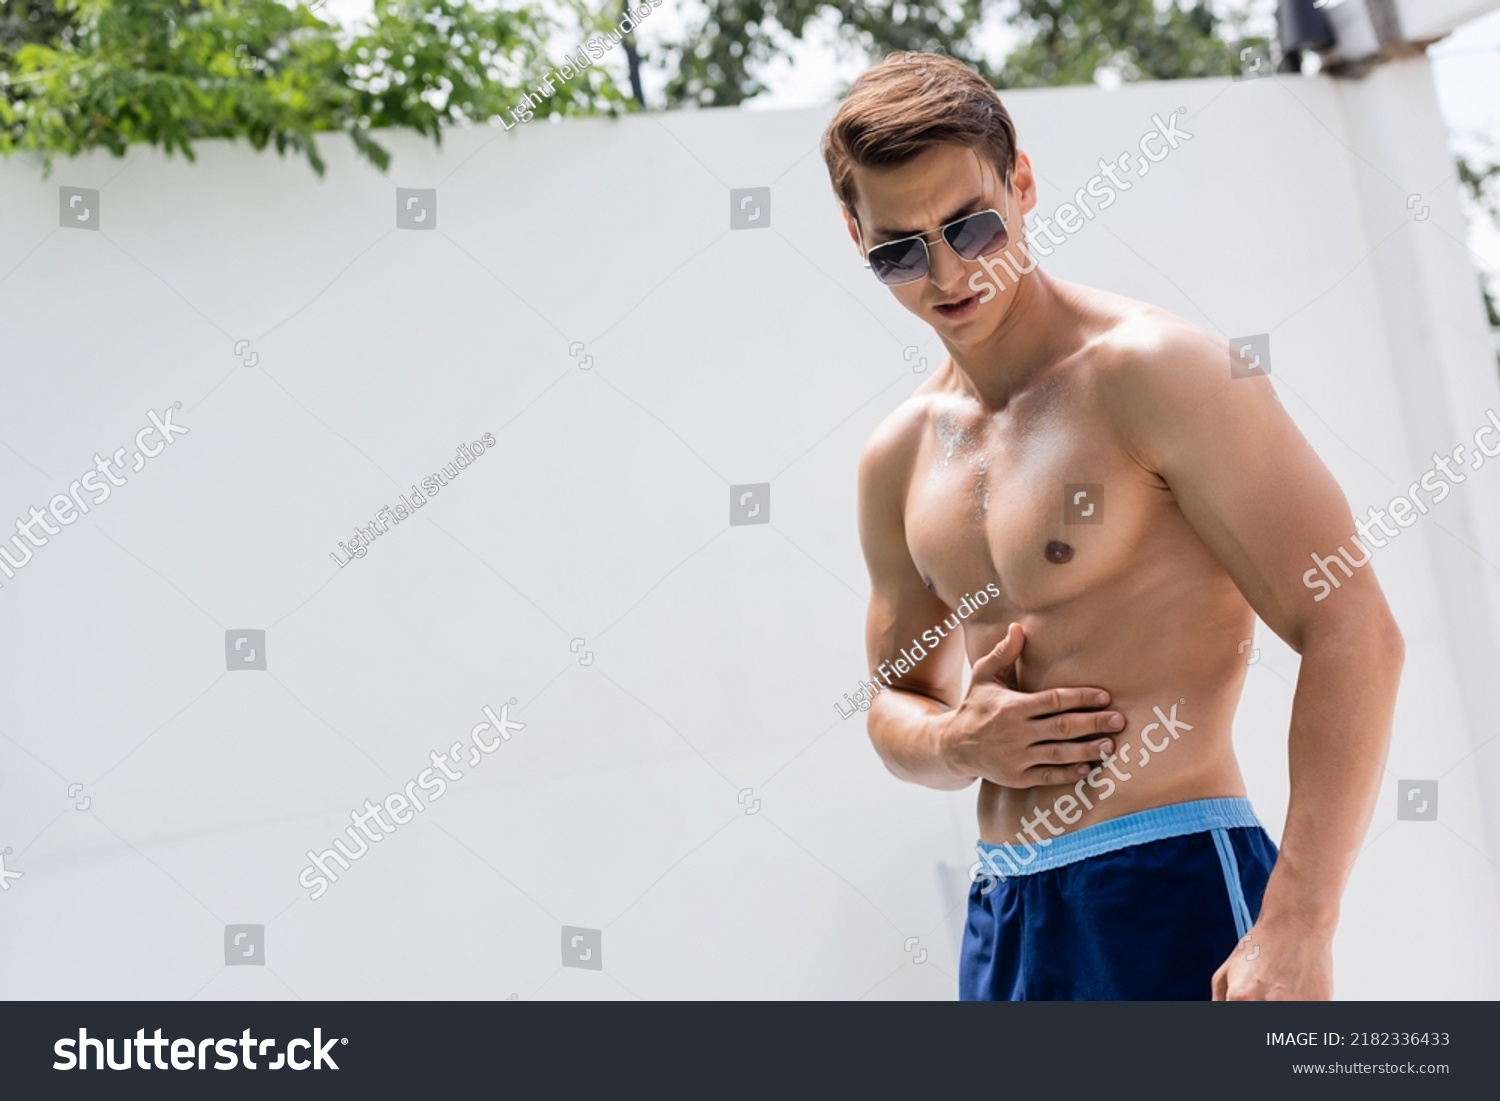 man in sunglasses and swimming trunks applying sunscreen on muscular torso #2182336433